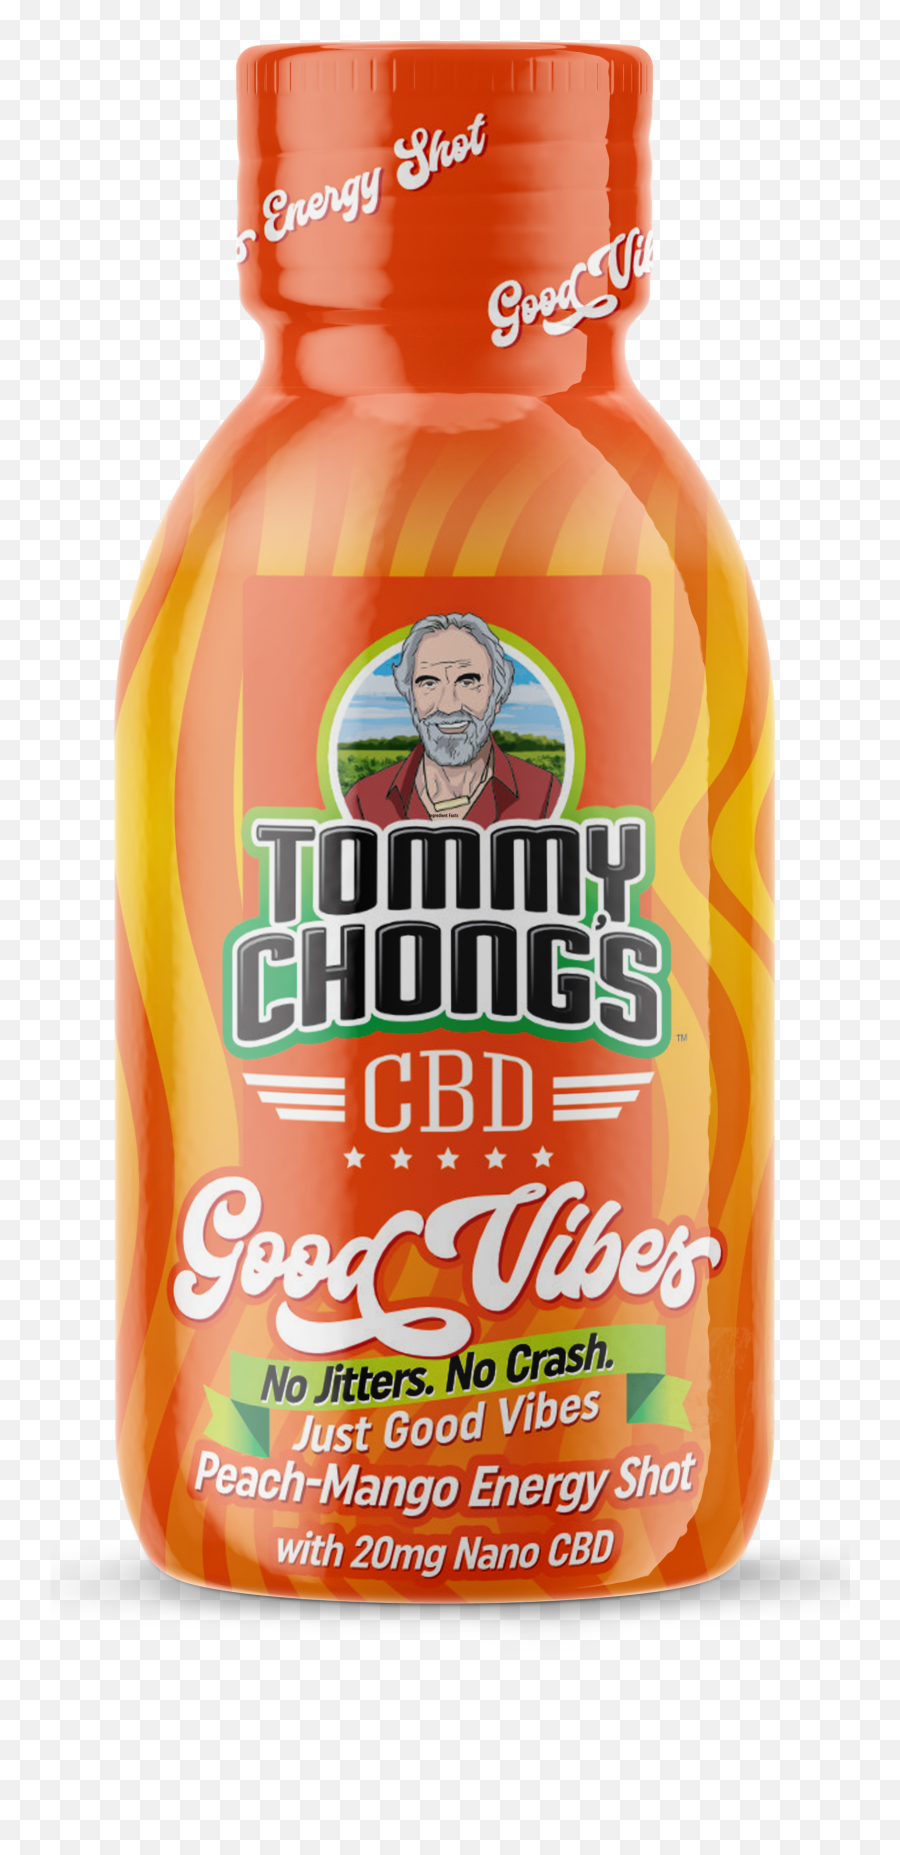 Tommy Chongs Good Vibes Energy Shots - Tommy Chongs Good Vibes Emoji,Tommy Chong Emoji